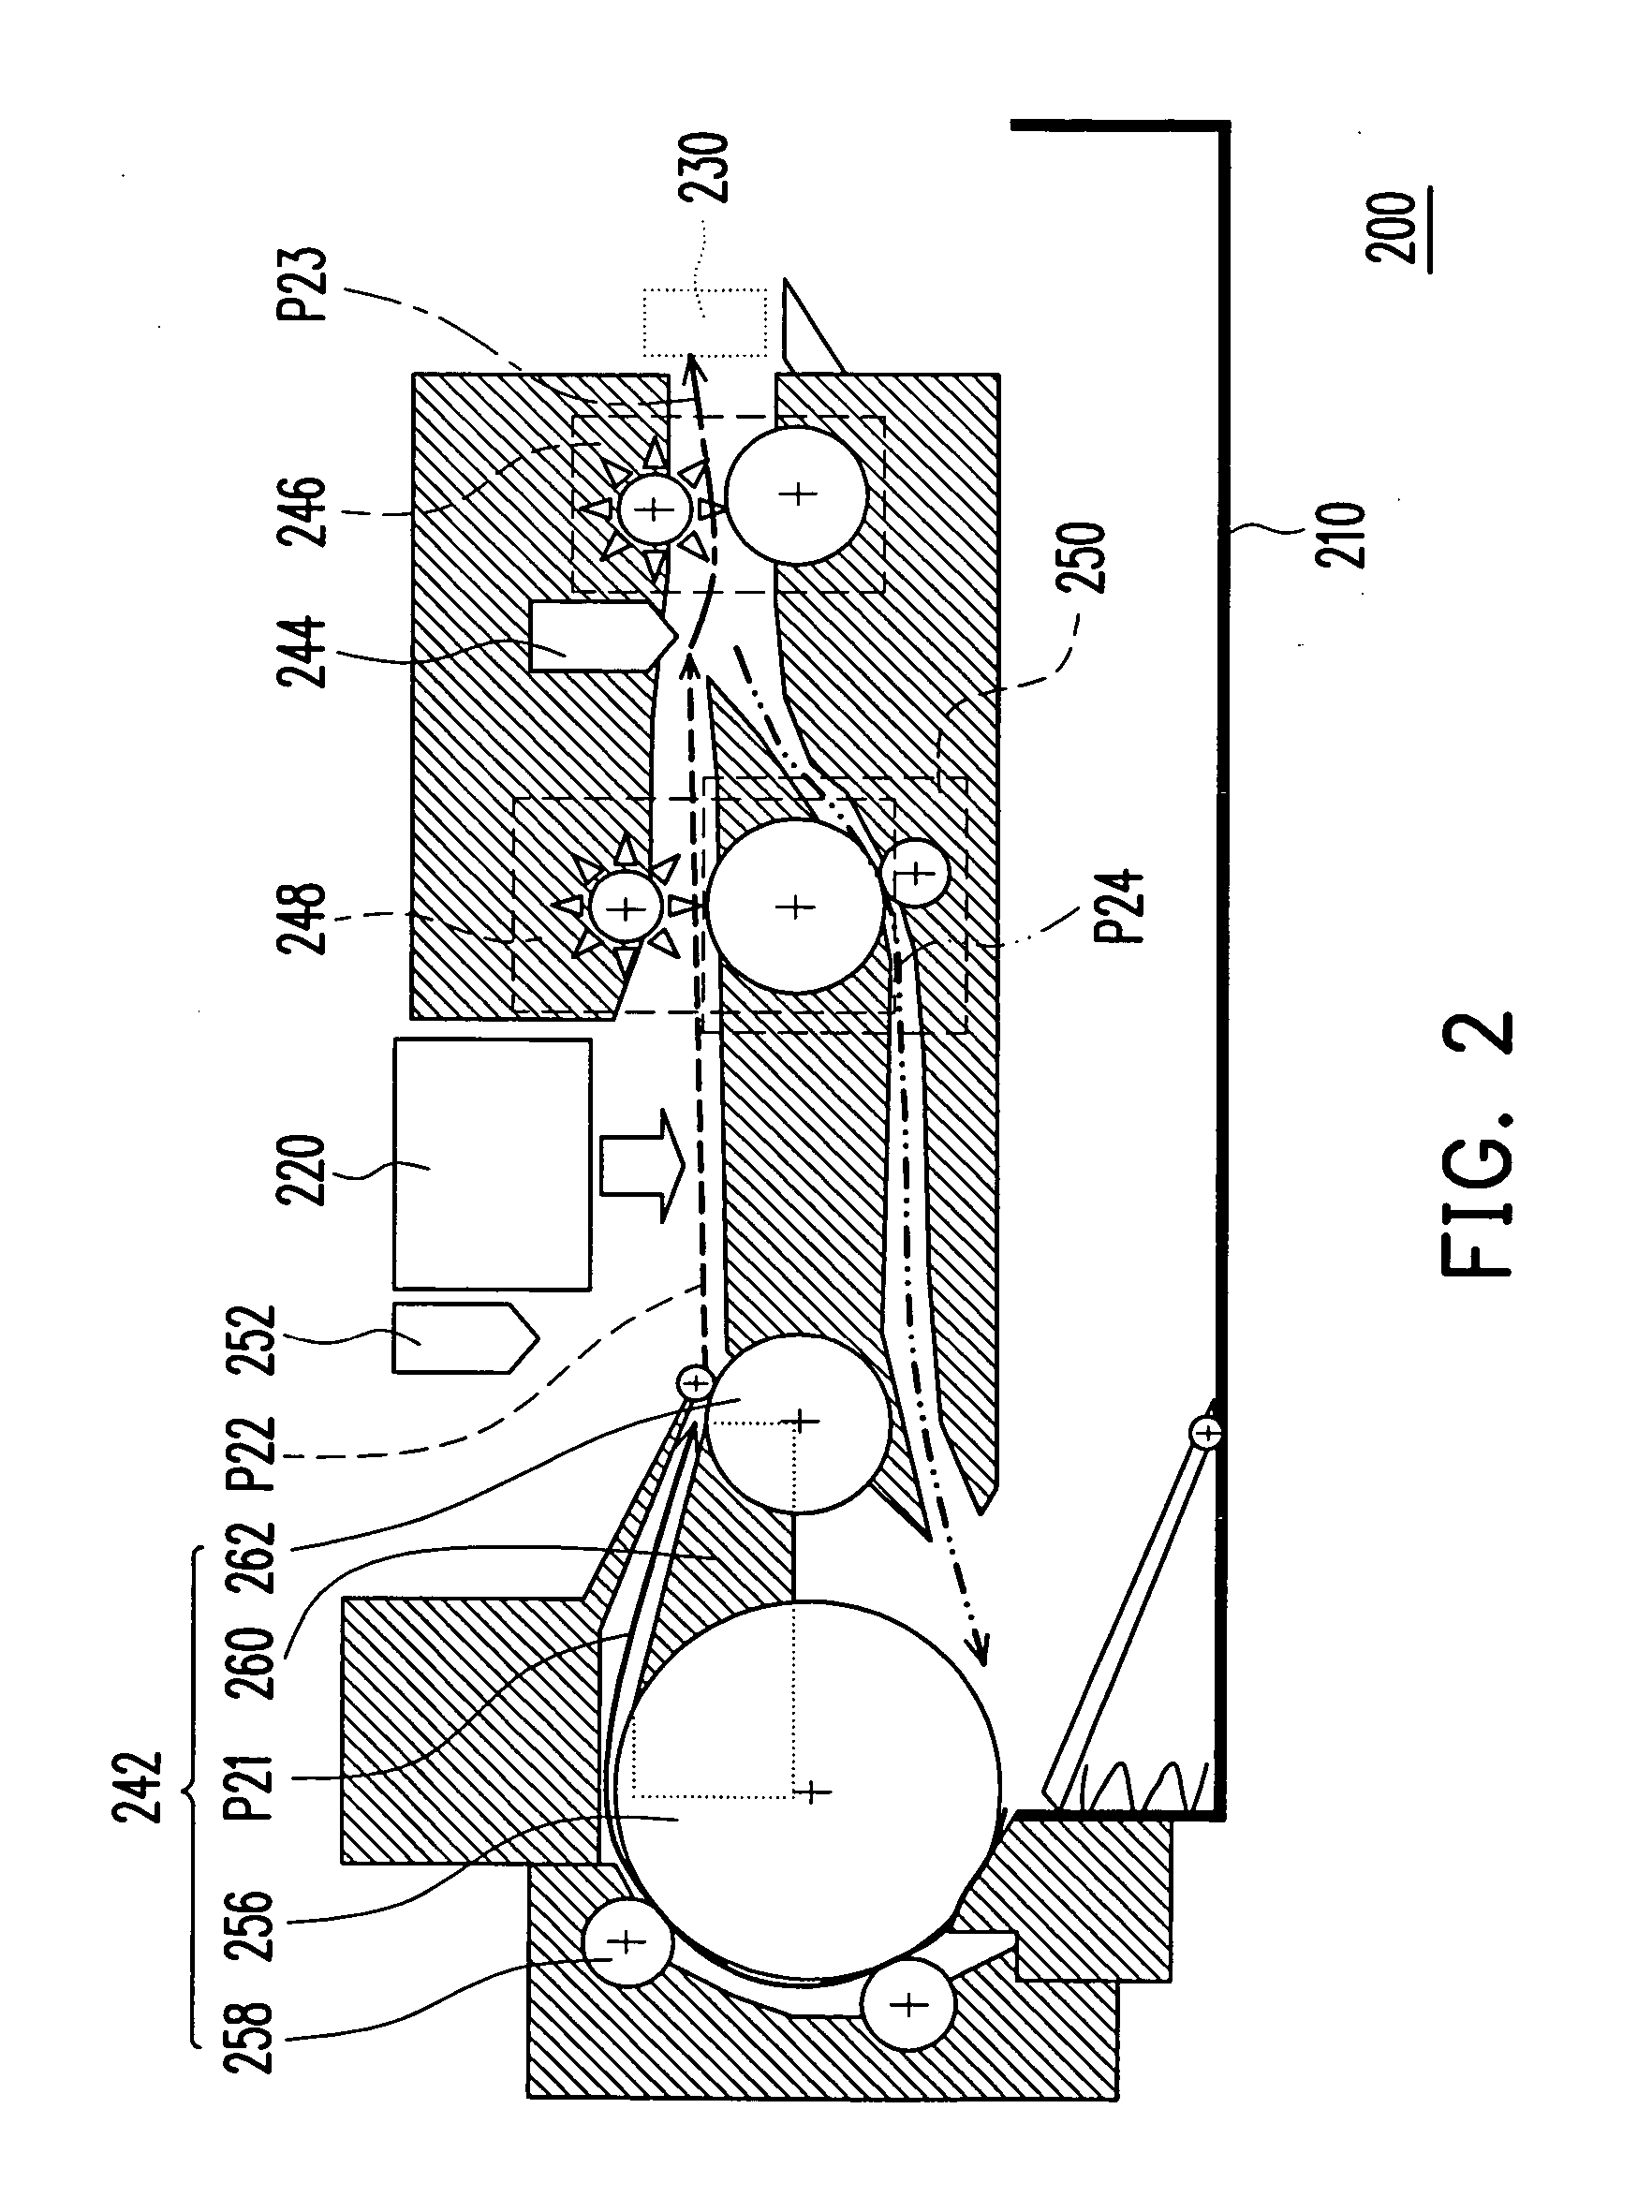 Sheet-feeding module for double-side printing and double-side printing method